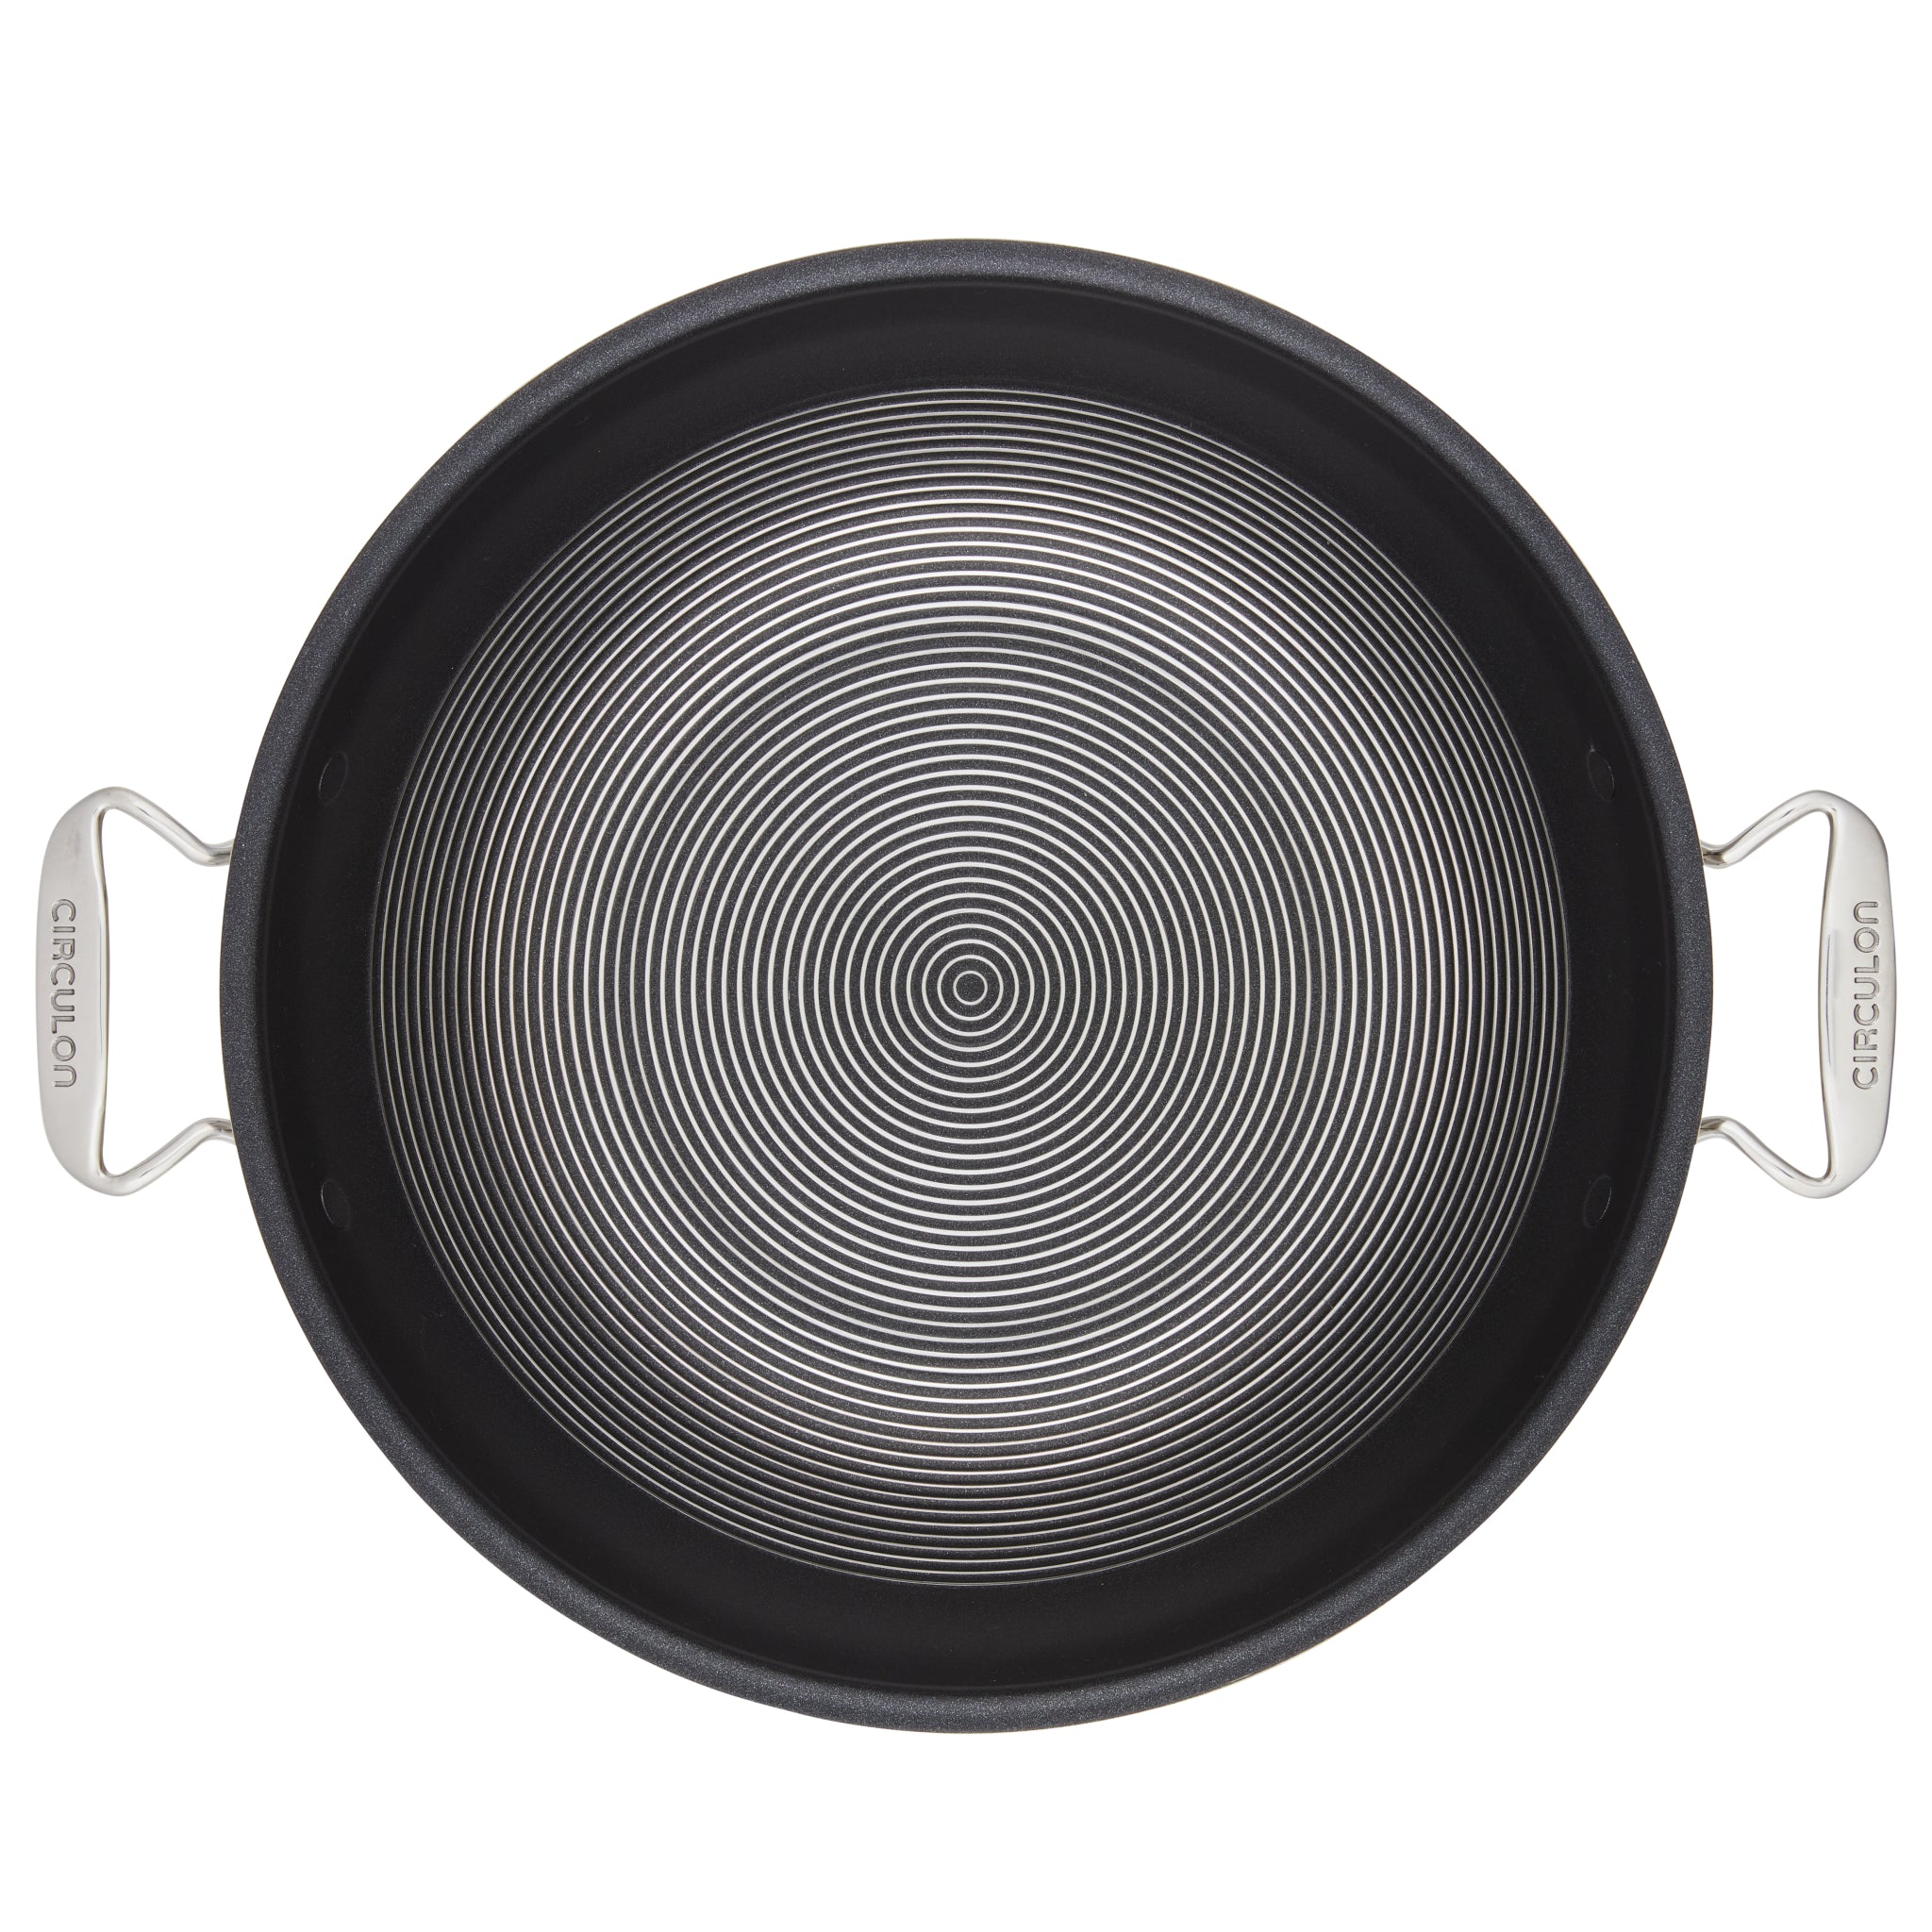 Wok with Glass Lid and Hybrid SteelShield Technology